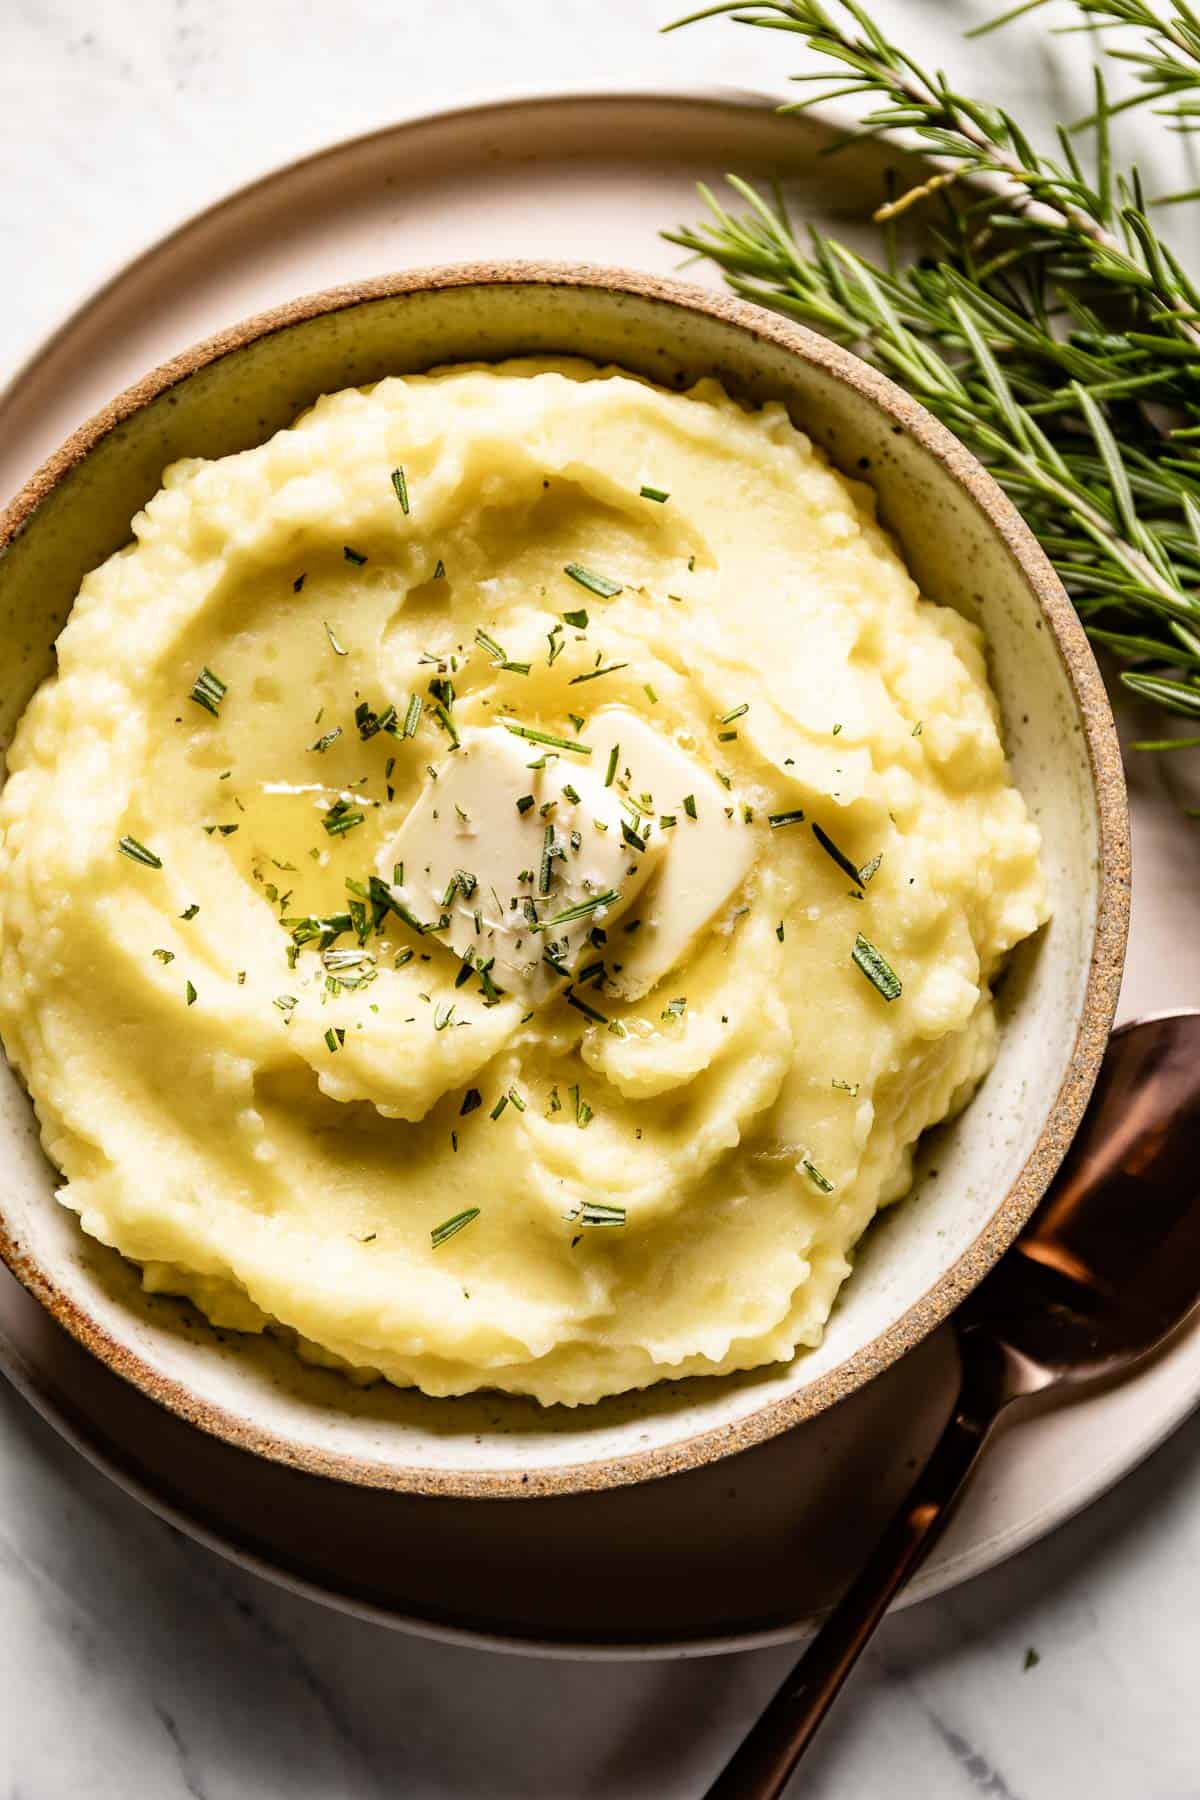 https://foolproofliving.com/wp-content/uploads/2022/10/Rosemary-Mashed-Potatoes.jpg